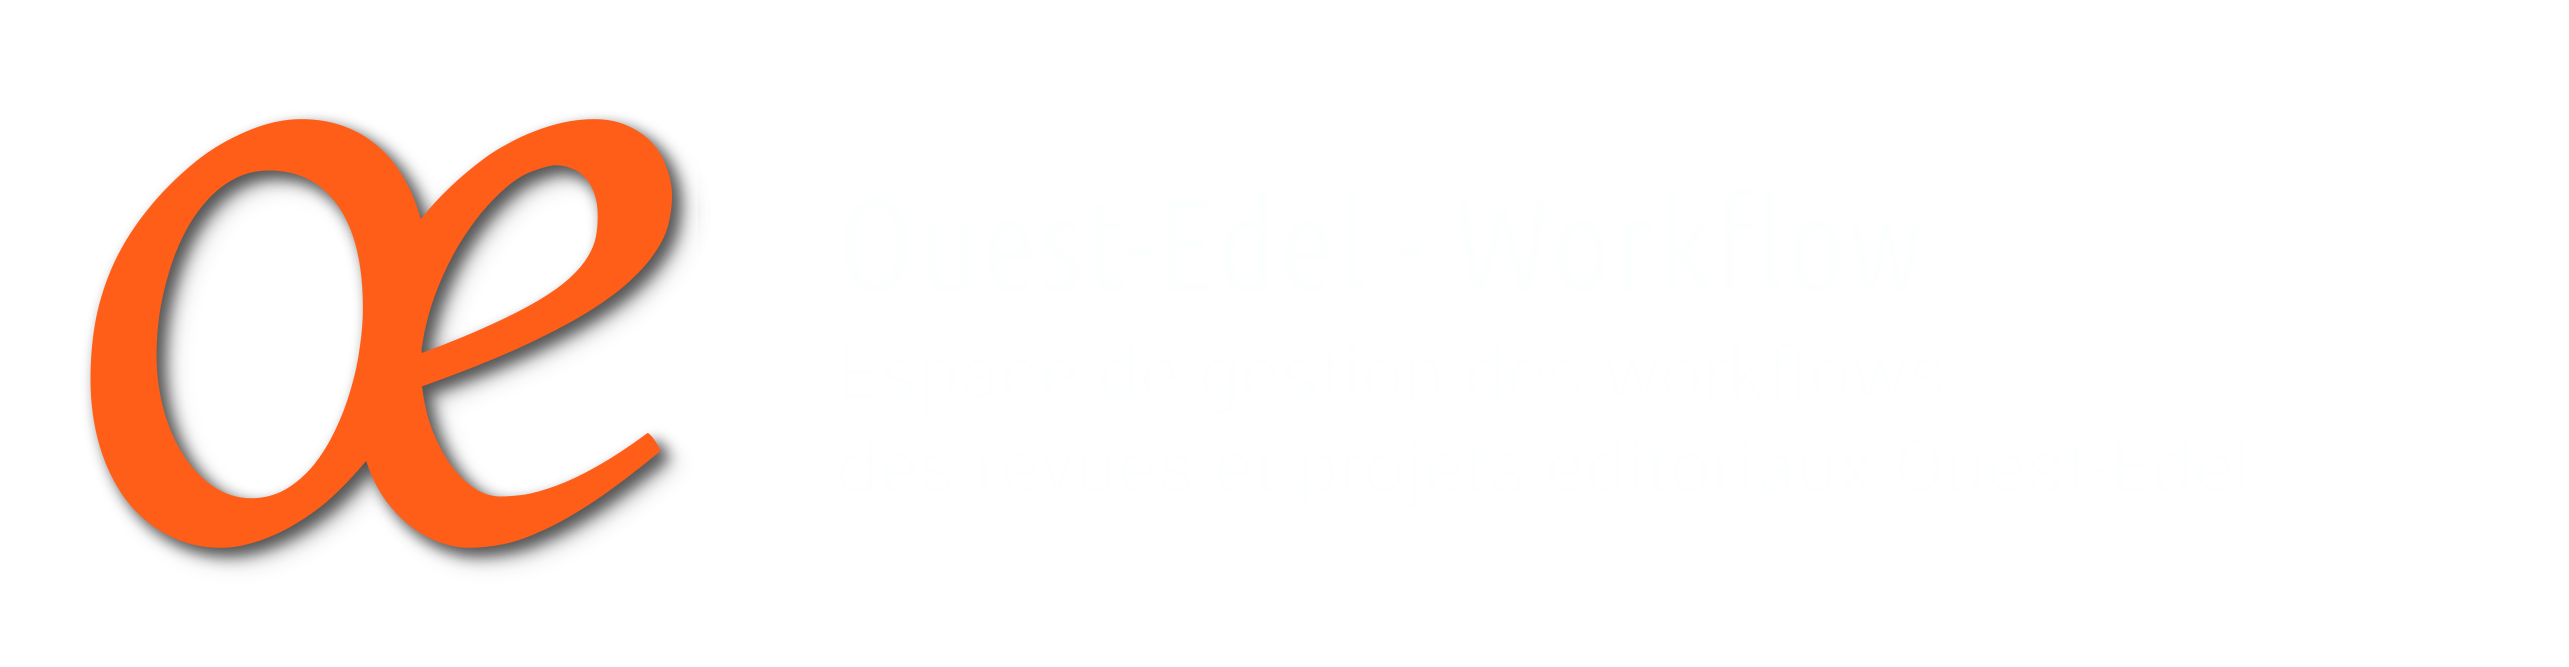 Ouest-Edel